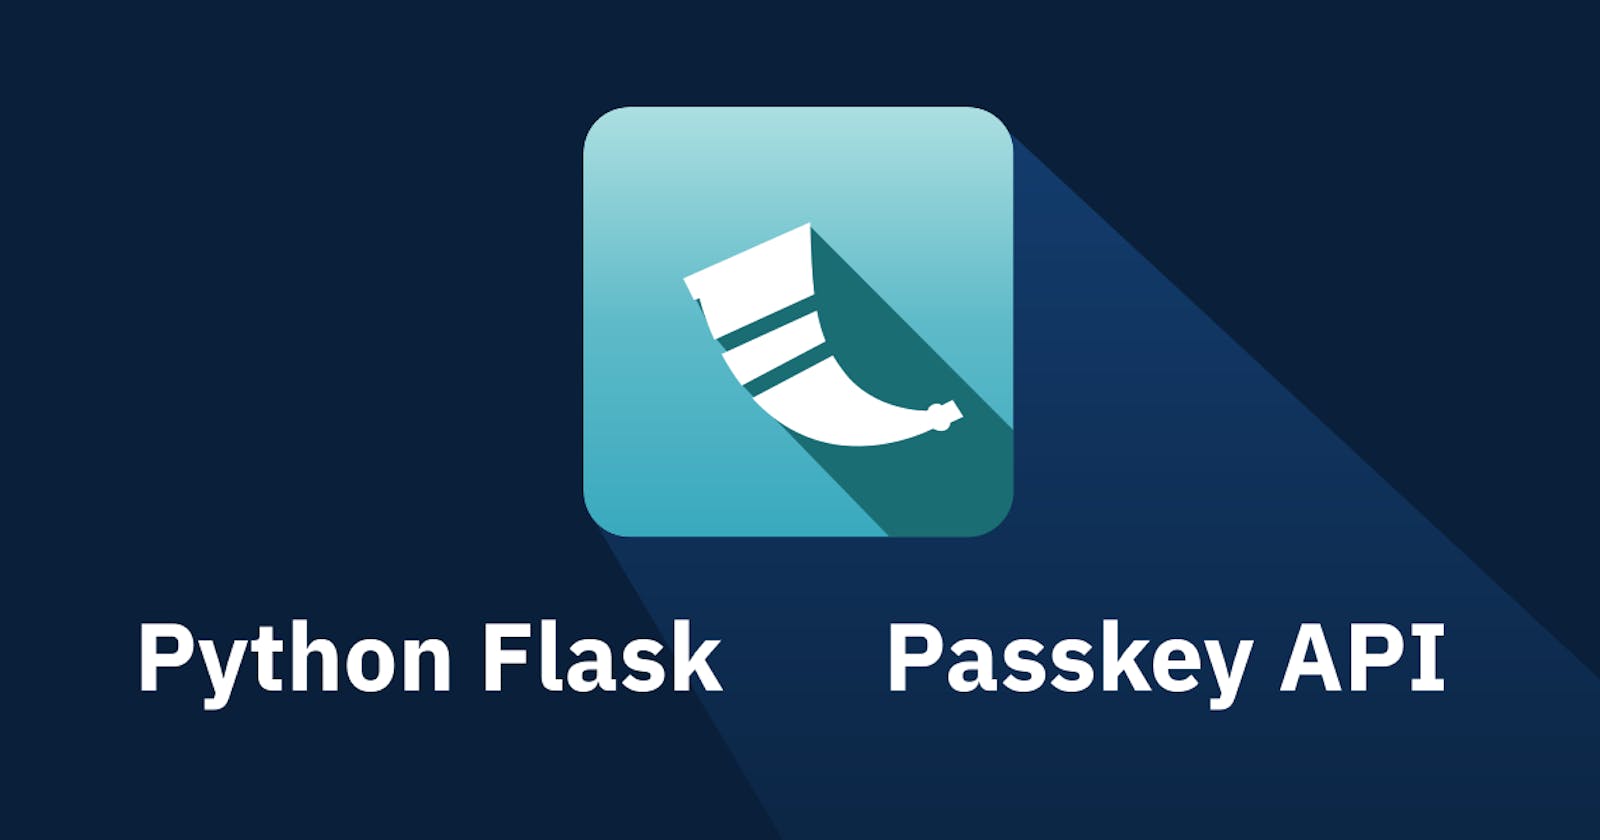 How to add Passkey Login to your Python Flask App